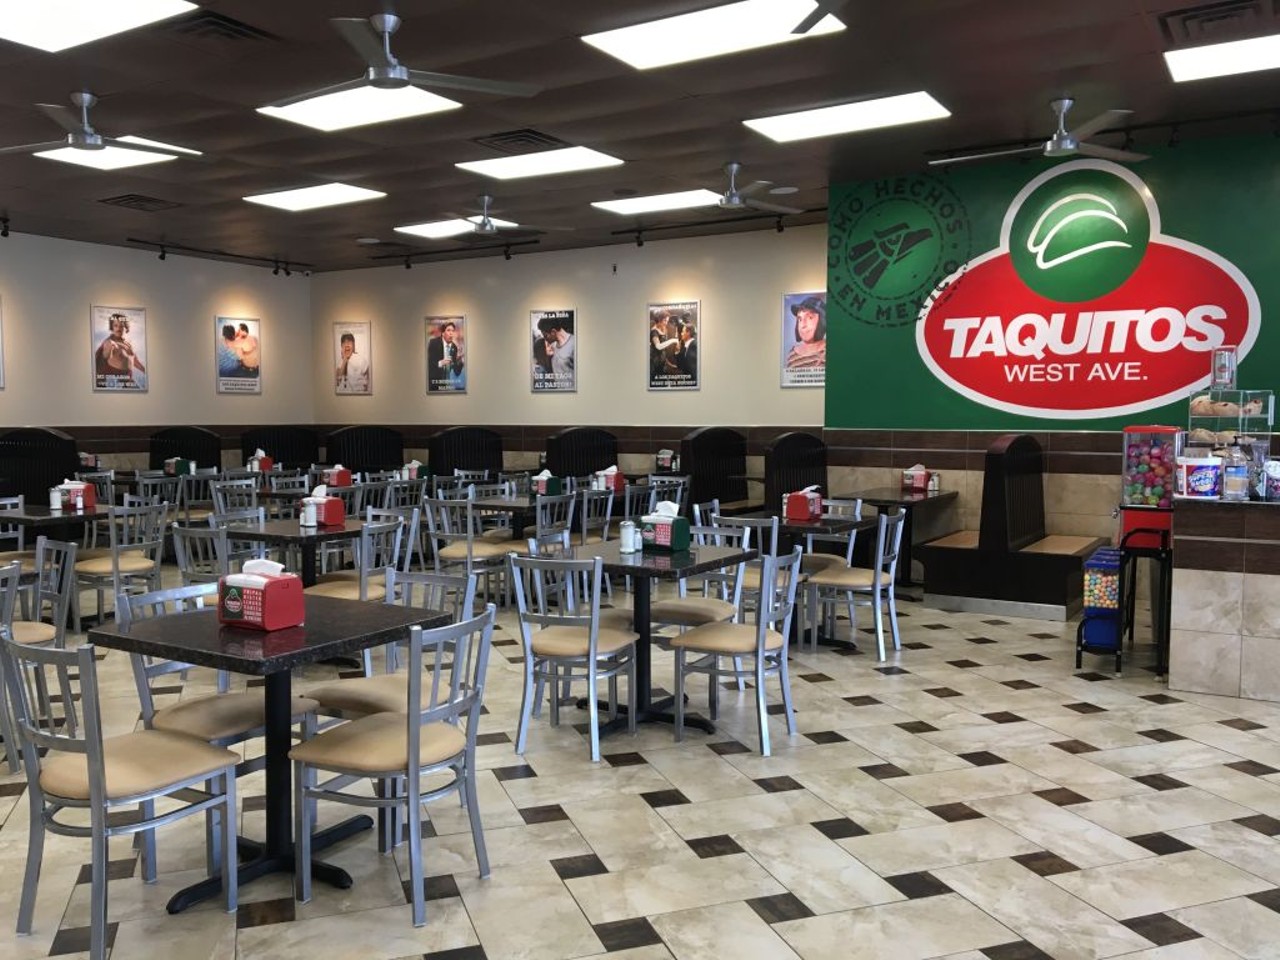 Here's a Look at Taquitos West Ave.'s Second Location